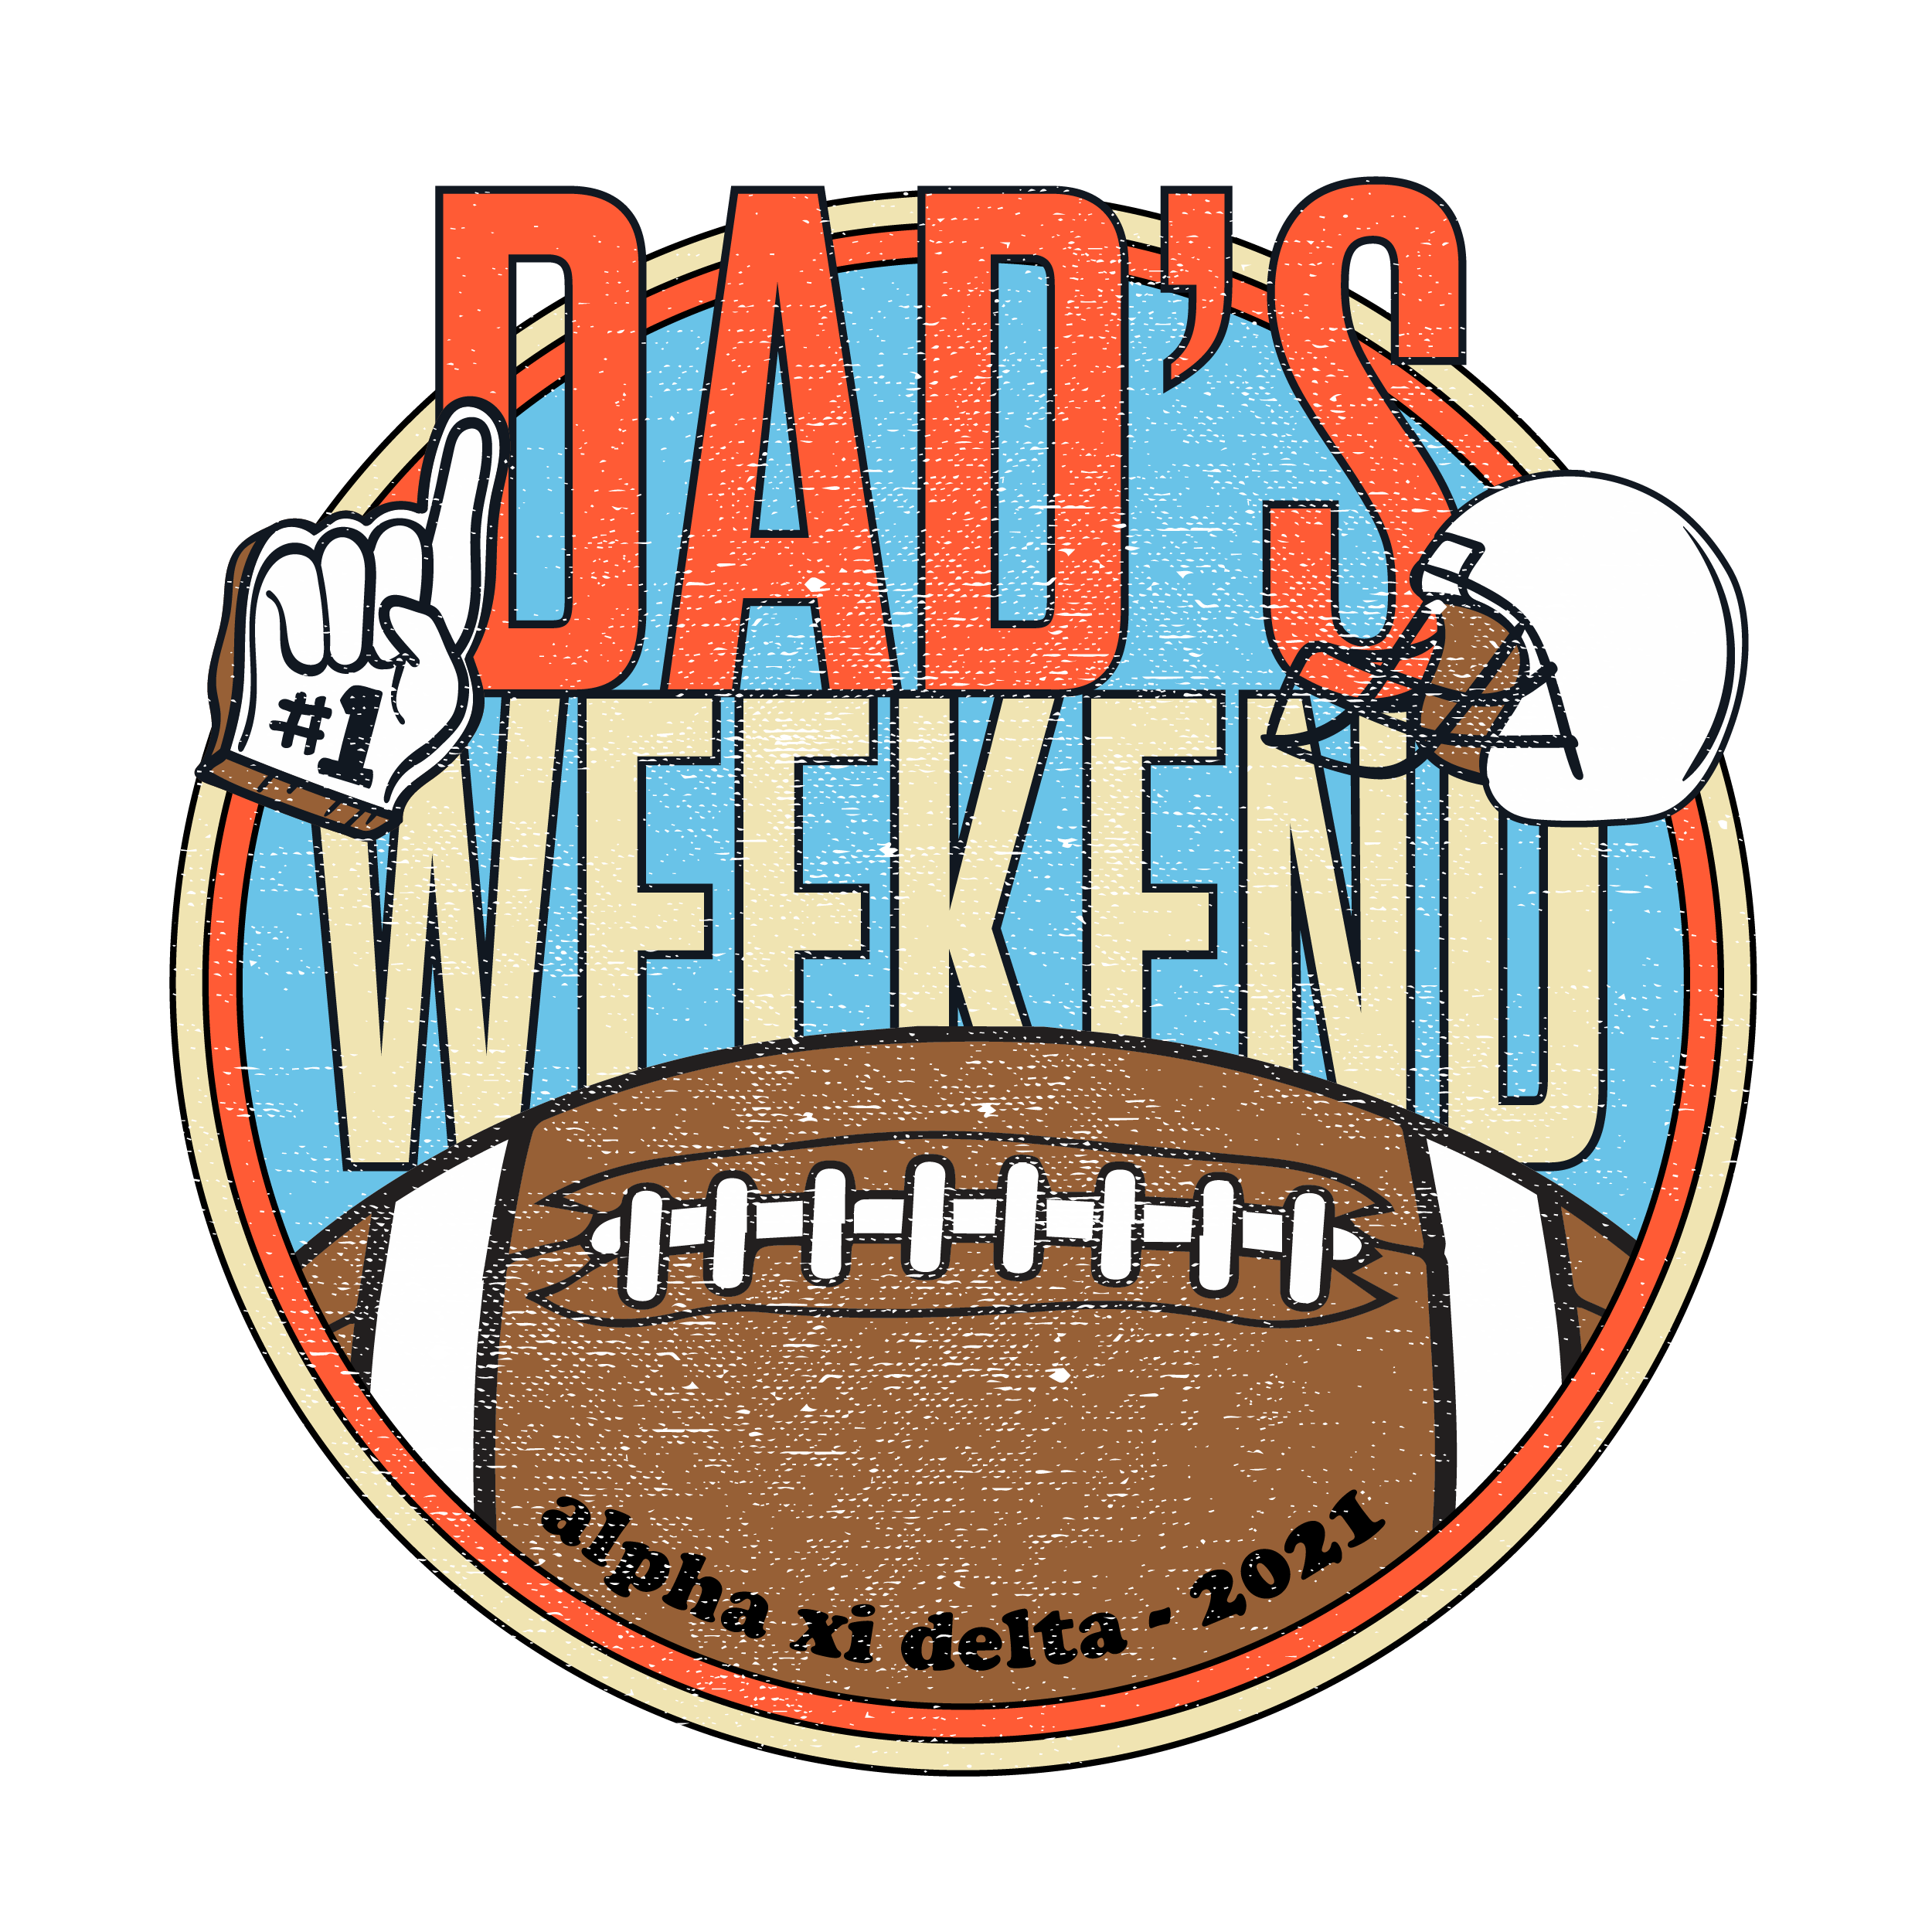 Dads Weekend Football.png